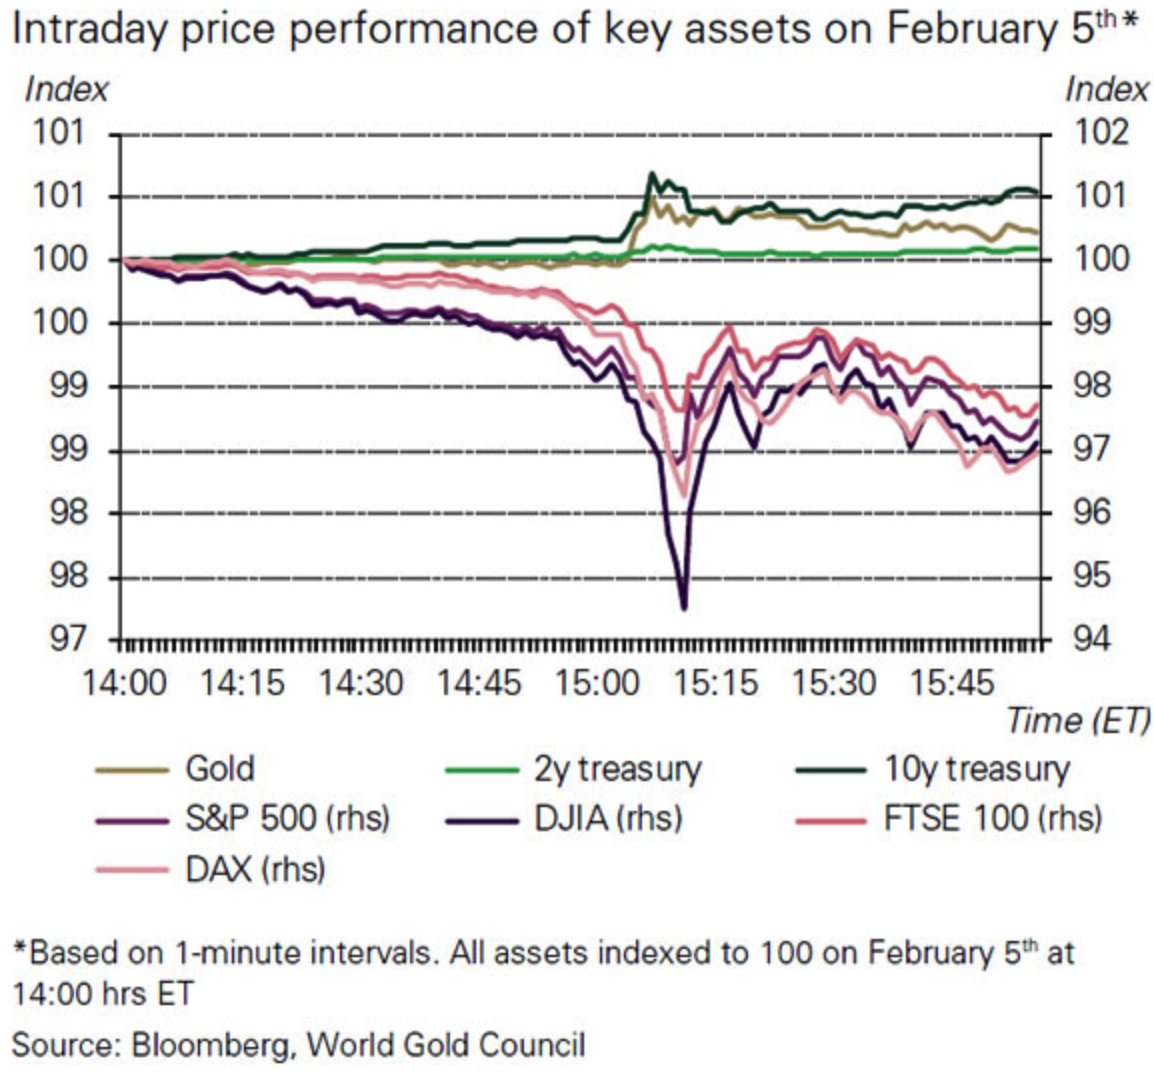 Intraday Price Performance of Key Assets, 5 February